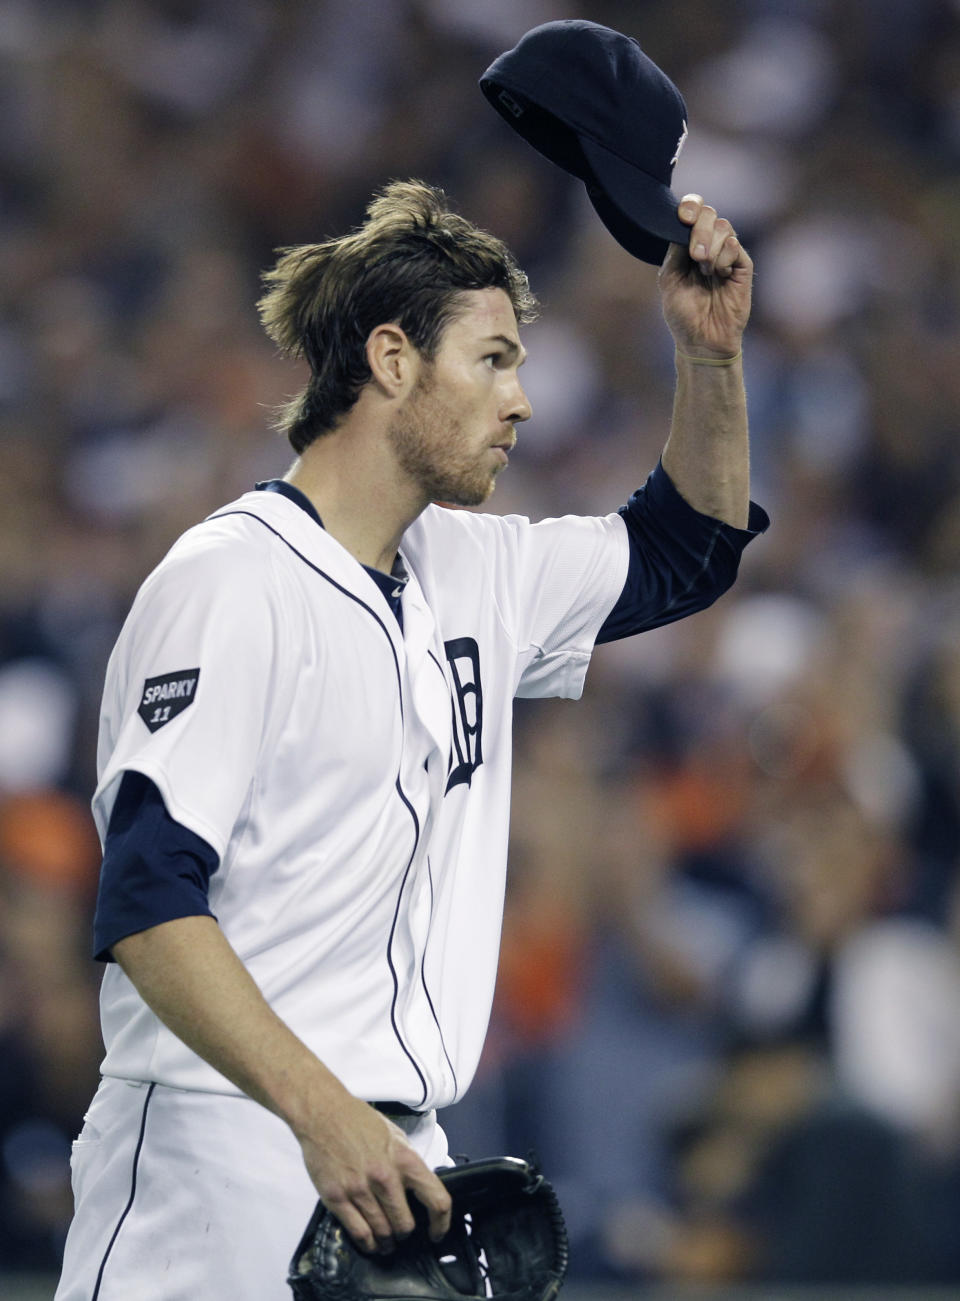 Detroit Tigers starting pitcher Doug Fister tips his hat after being replaced by relief pitcher Joaquin Benoit in the eighth inning of Game 3 of baseball's American League championship series against the Texas Rangers, Tuesday, Oct. 11, 2011, in Detroit. (AP Photo/Paul Sancya)